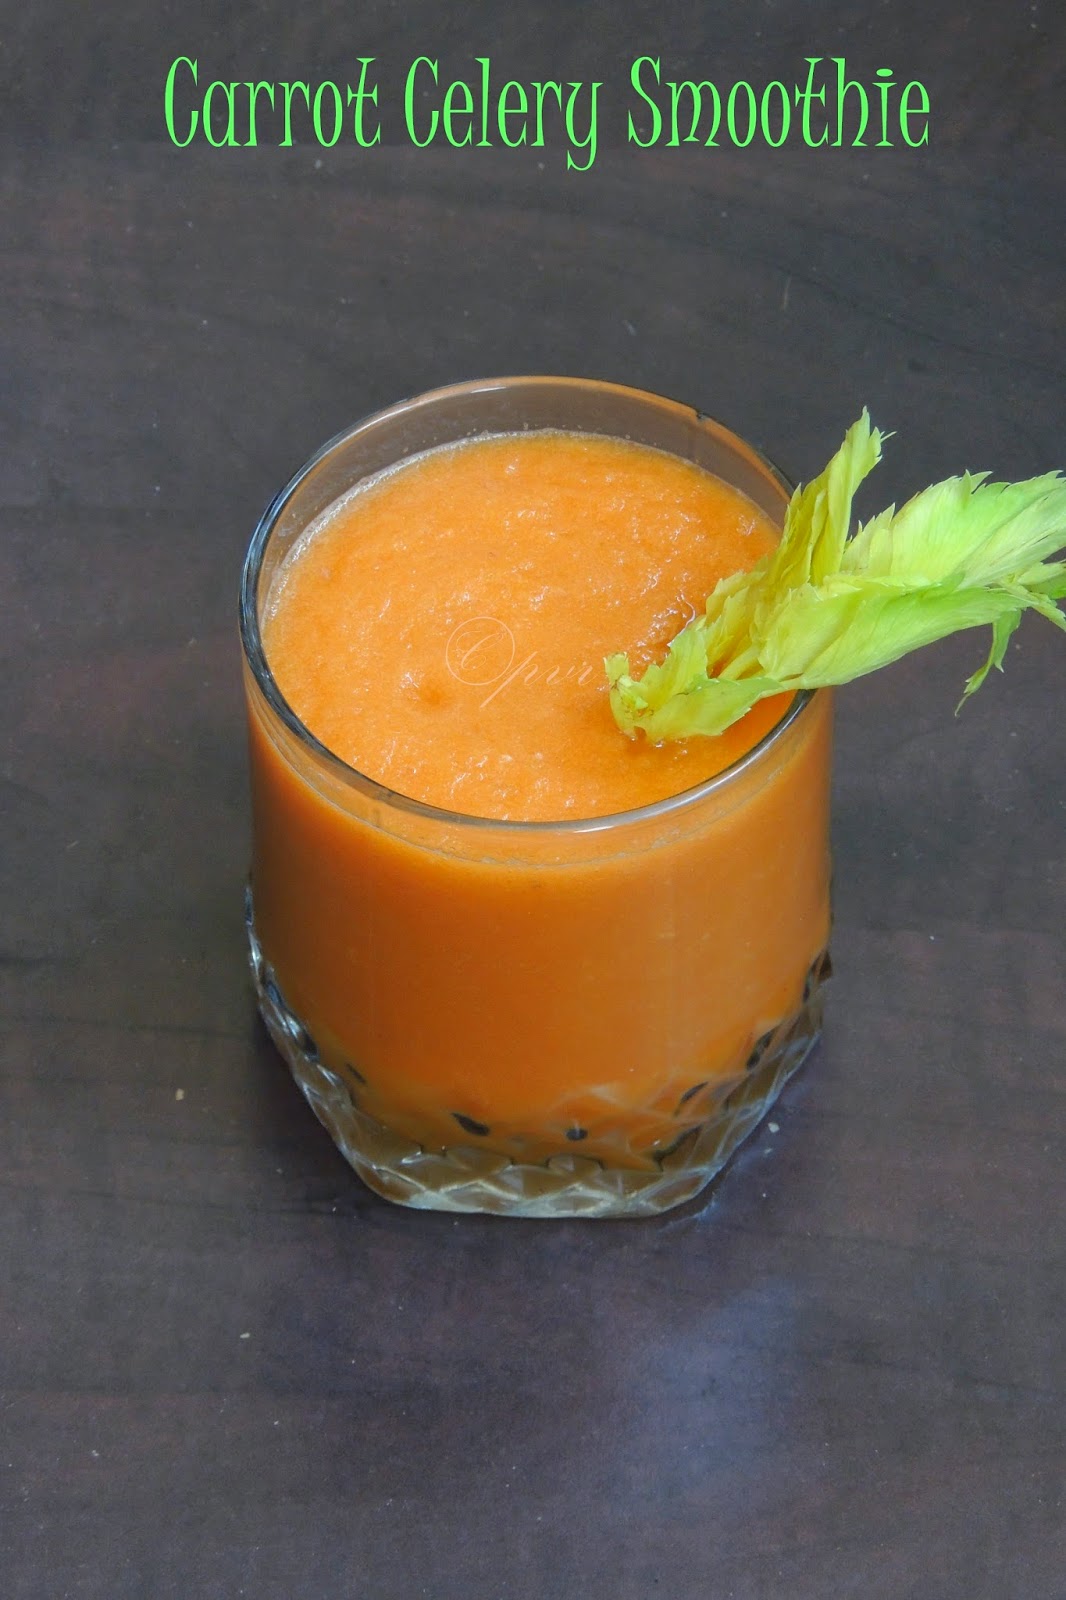 Carrot smoothie, celery smoothie, carrot and celery smoothie